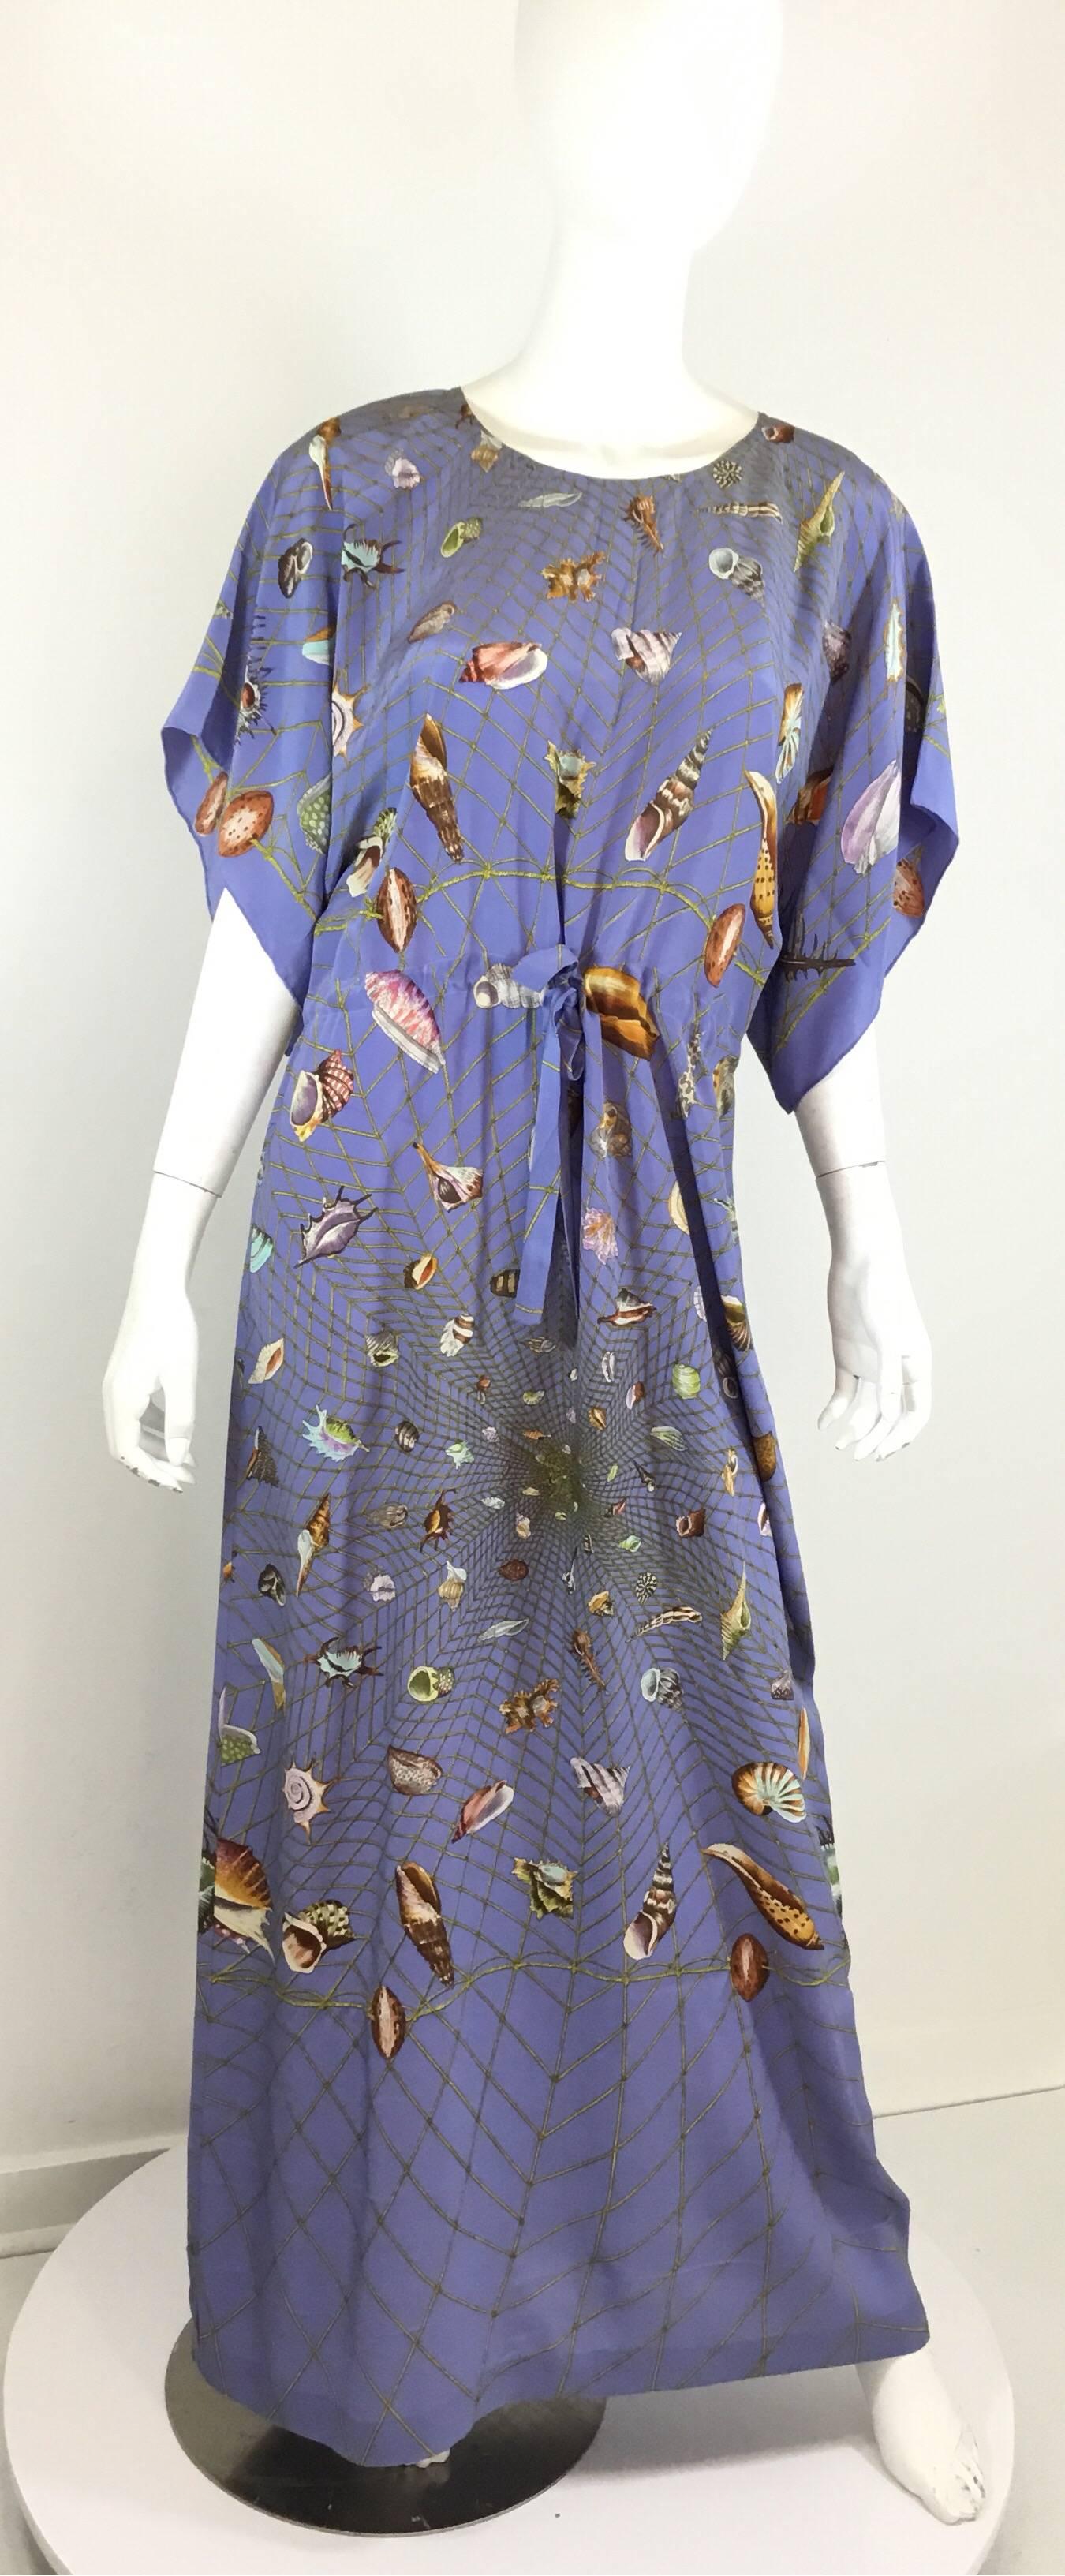 Vintage Gucci maxi dress features a sea shell print throughout the lavender-colored silk fabric, dolman style sleeves, and a drawstring waist tie fastening. Labeled size 44, made in Italy, 100% silk.

bust 41”
waist 38”
hips 43”
length 53”